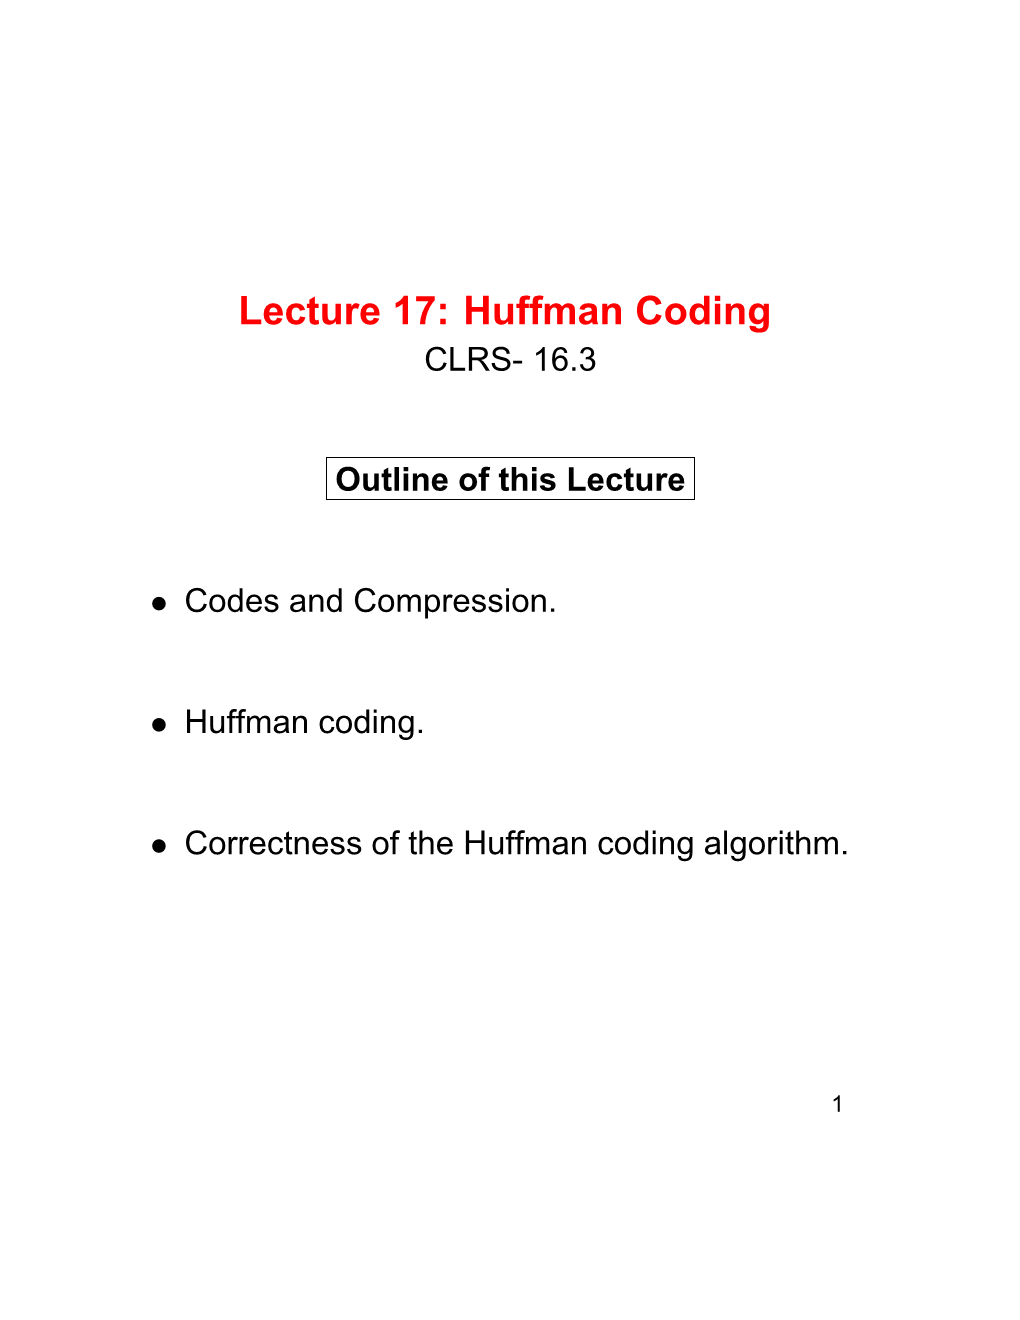 Lecture 17: Huffman Coding CLRS- 16.3